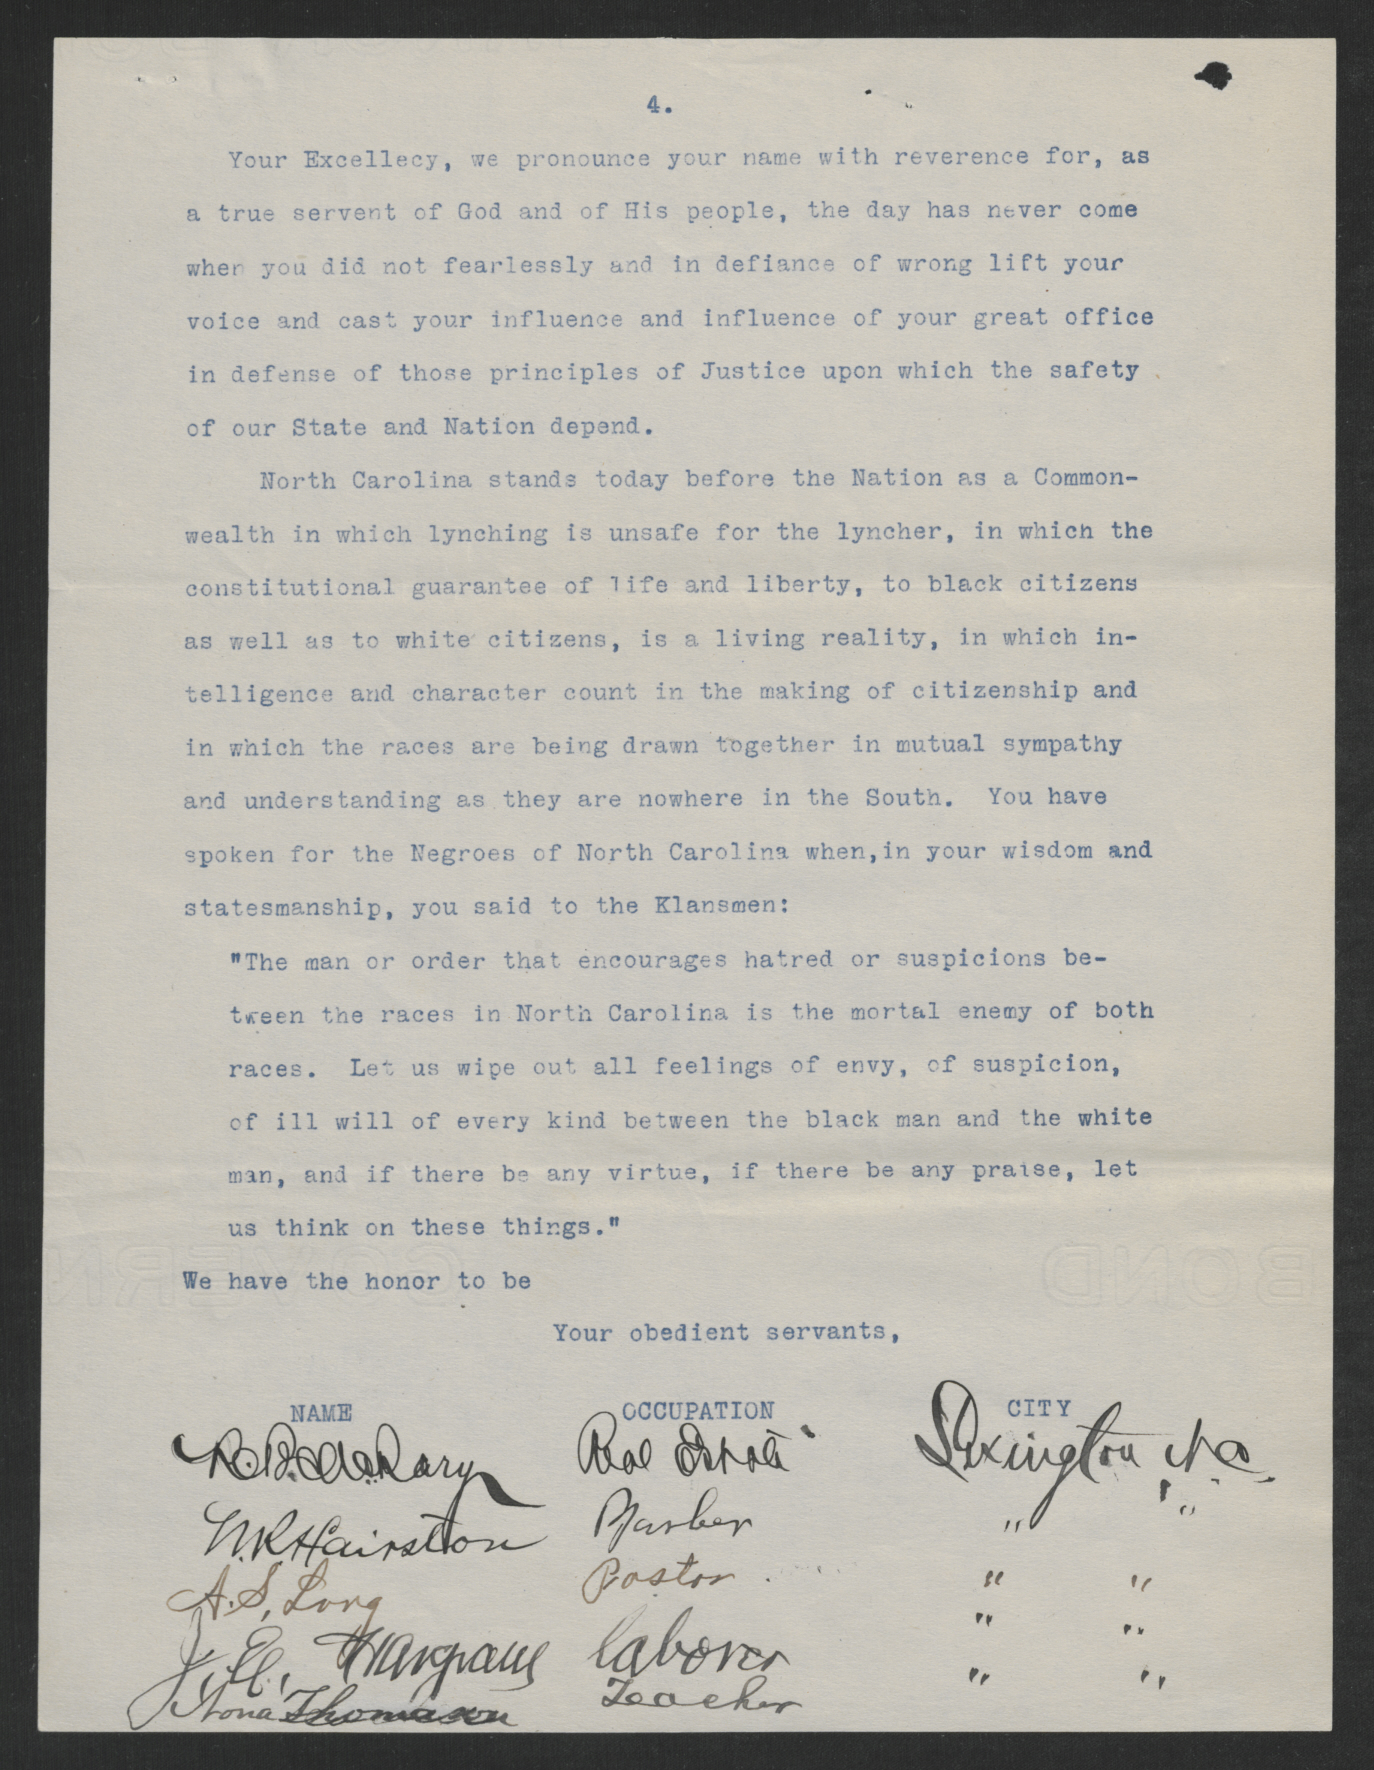 A Memorial of Thanks to Governor T. W. Bickett from the Citizens of Lexington, N.C., ca. July 1919, page 4